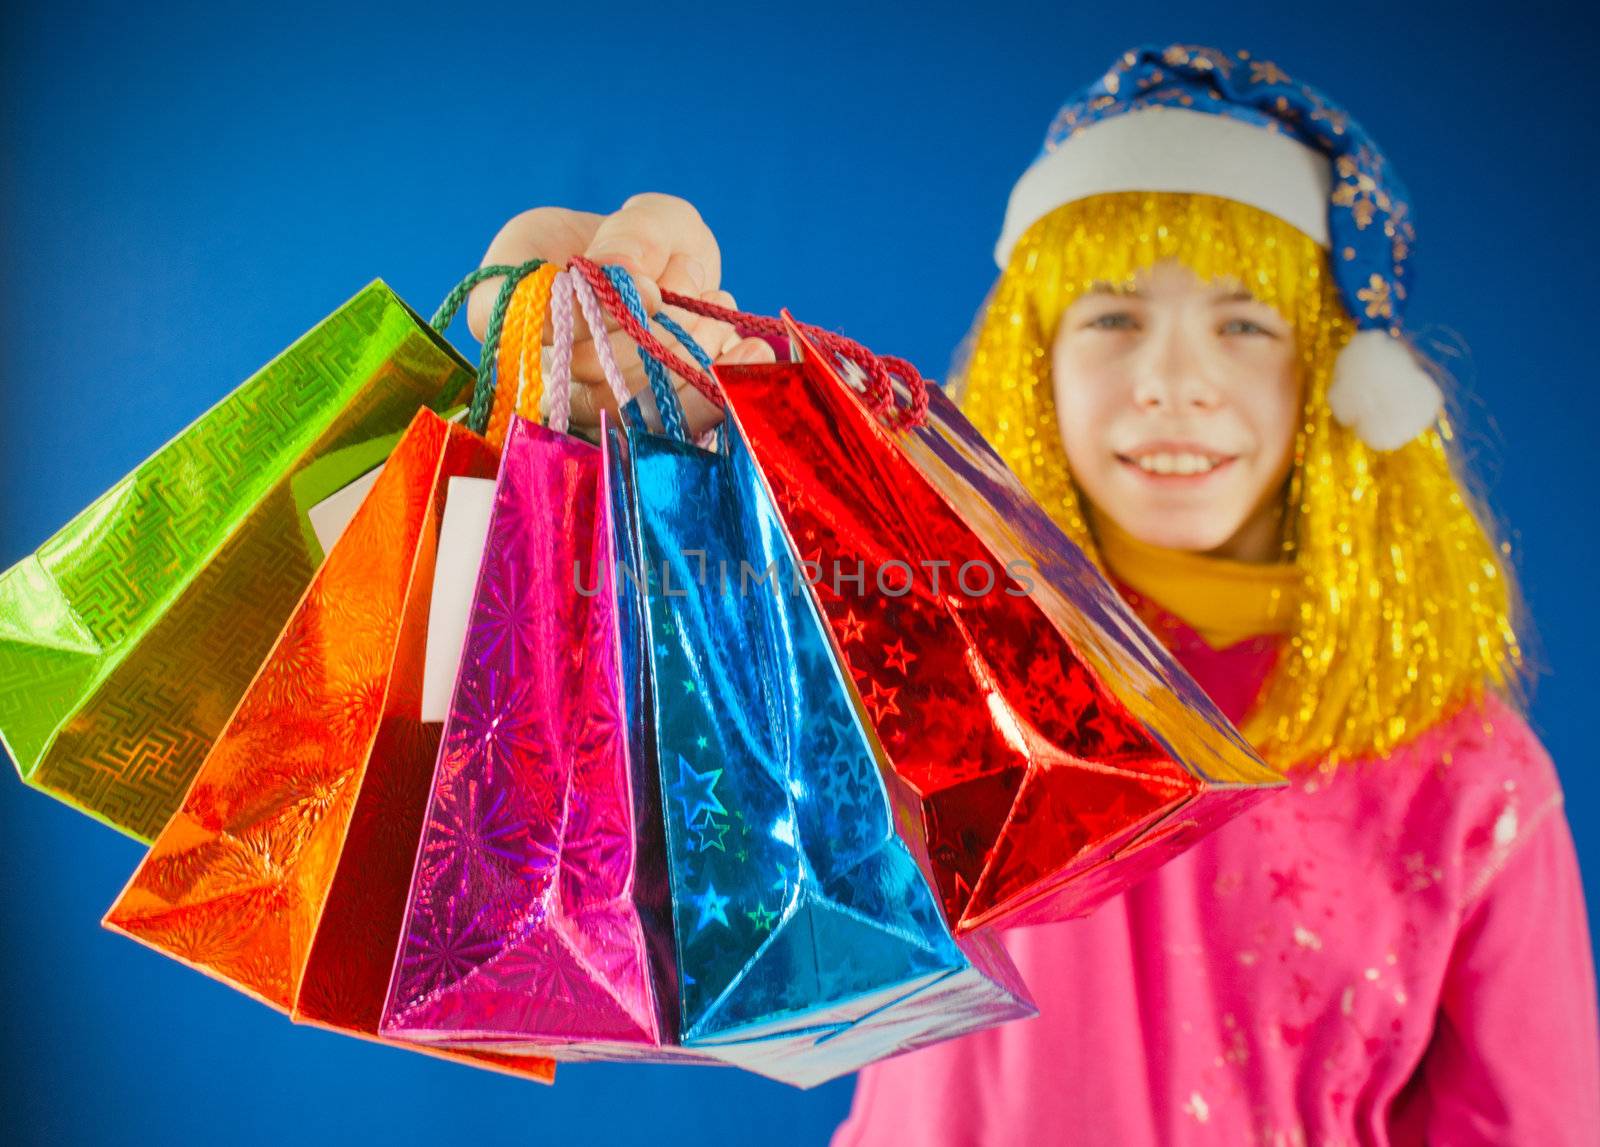 Teen girl holds a variety of colorful bags against blue background